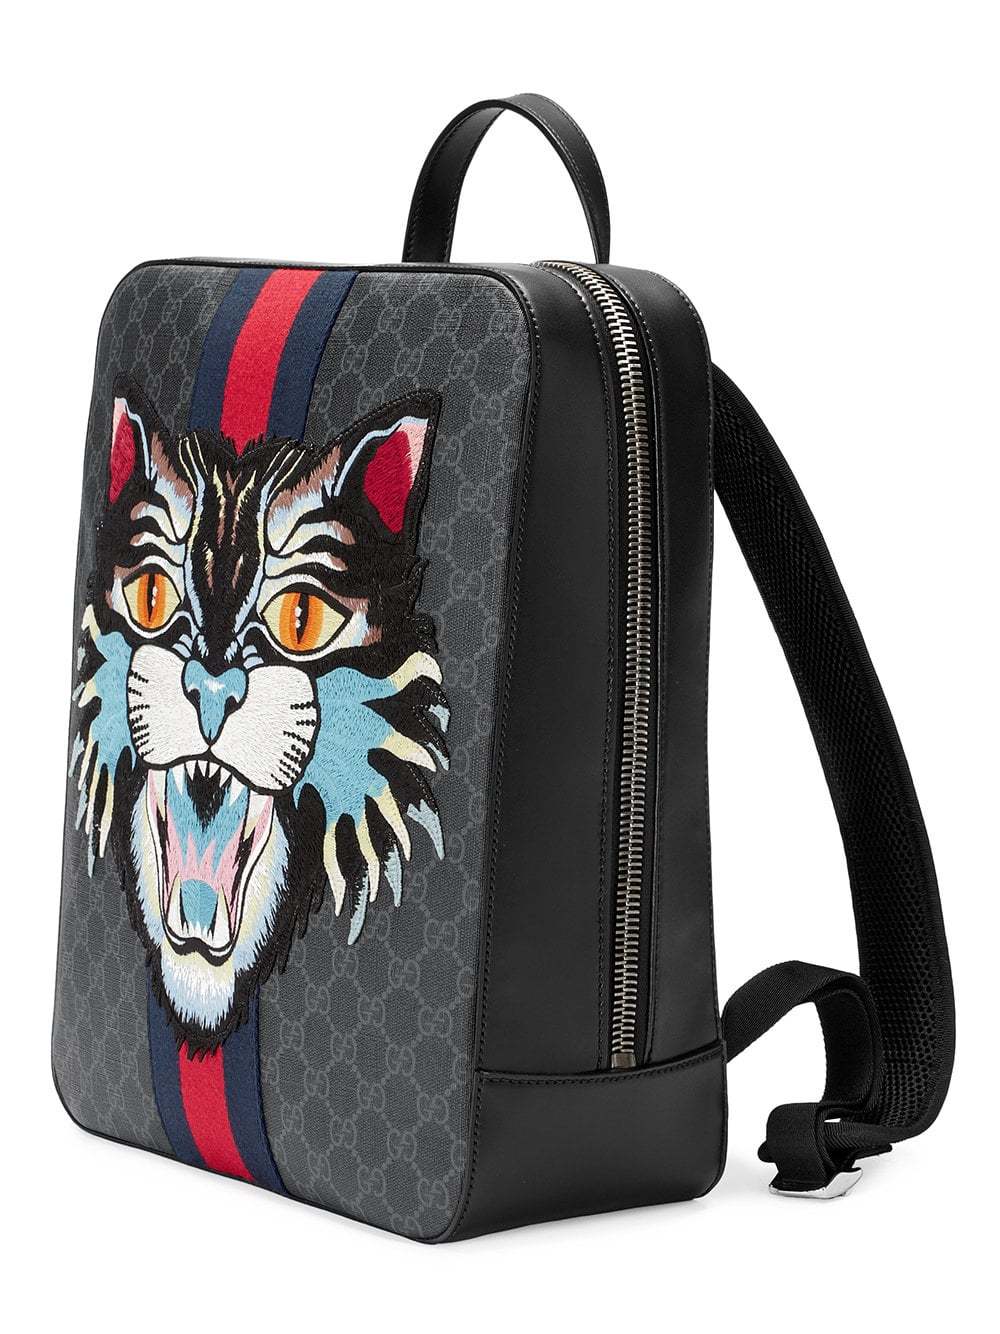 Gucci Gg Supreme With Angry Cat, $1,796 | farfetch.com |